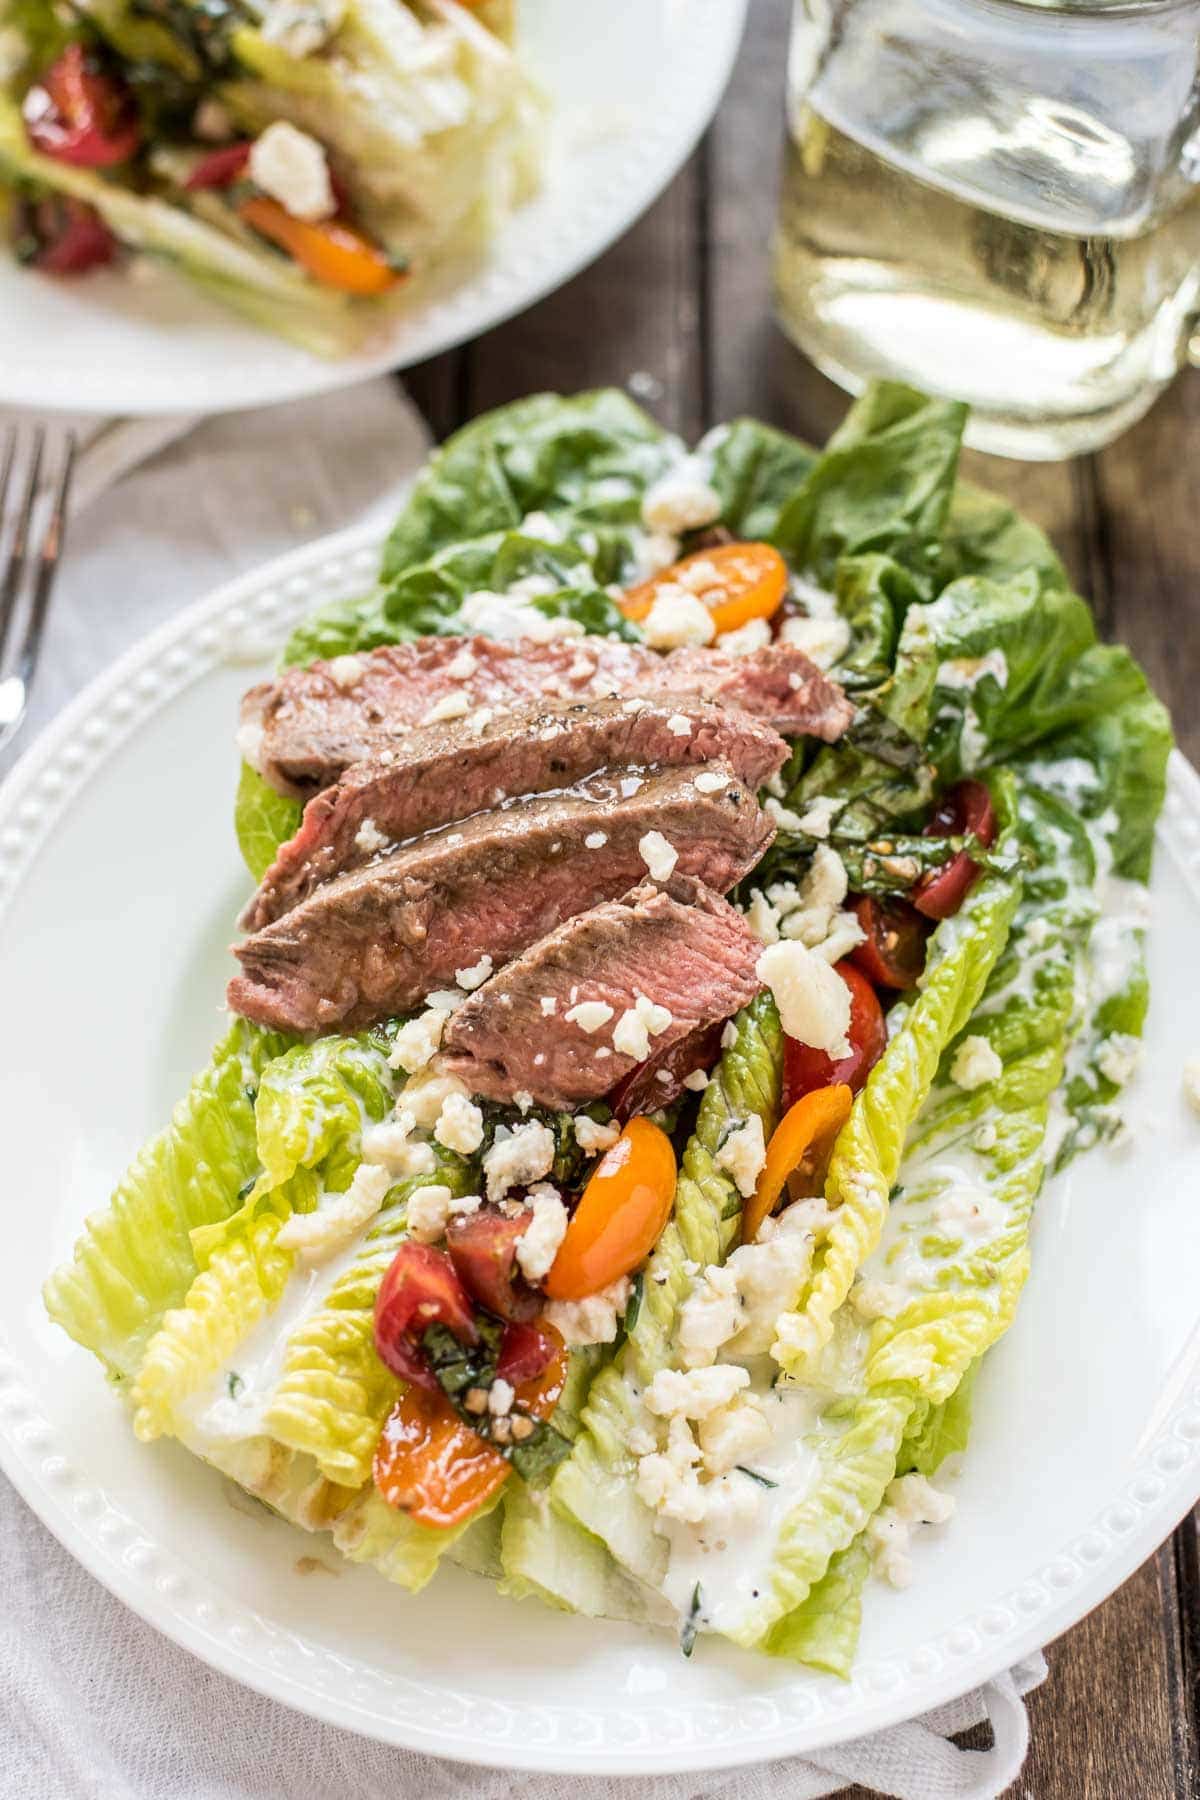 This gorgeous Steak and Blue Cheese Salad is loaded with bruschetta cherry tomatoes, homemade buttermilk dressing, blue cheese crumbles, and ribeye steak!